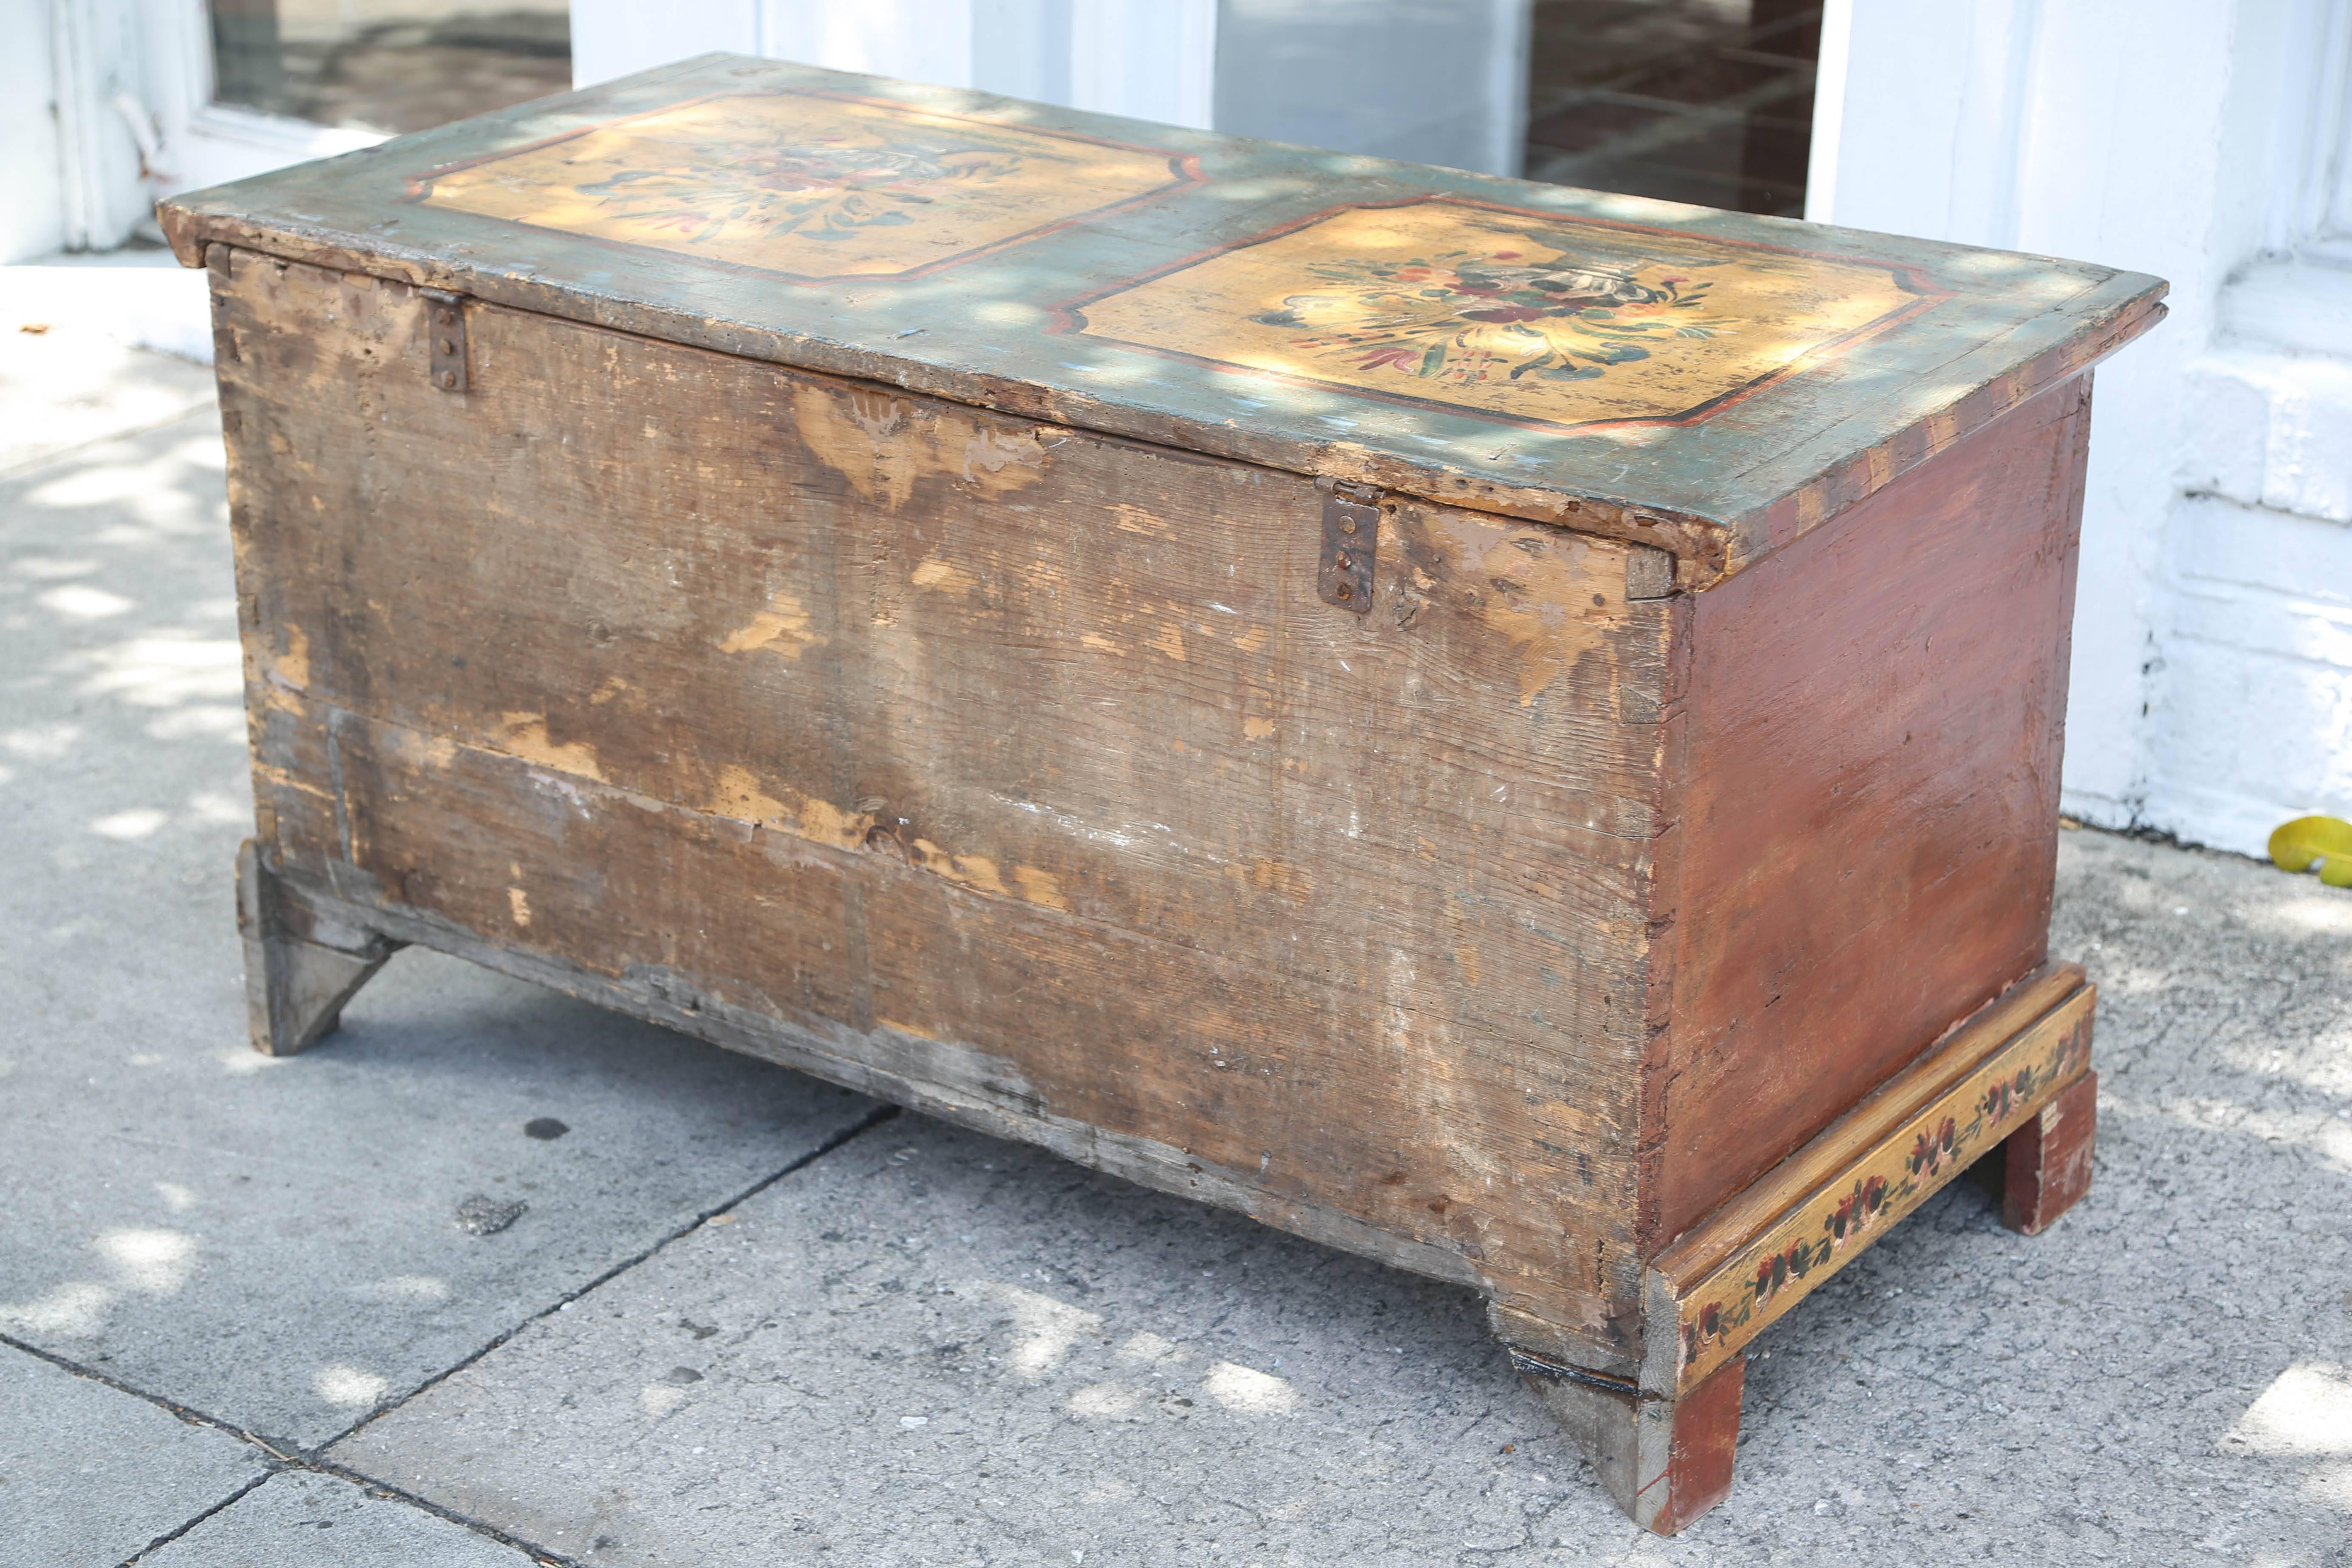 This is a original hand-painted antique trunk made in Italy.
To the top and front its hand-painted with flowers.
It sits on bracket feet and still has the little soap box inside,
circa 1860.
Measurements are 46 wide, 22 deep 24 high.